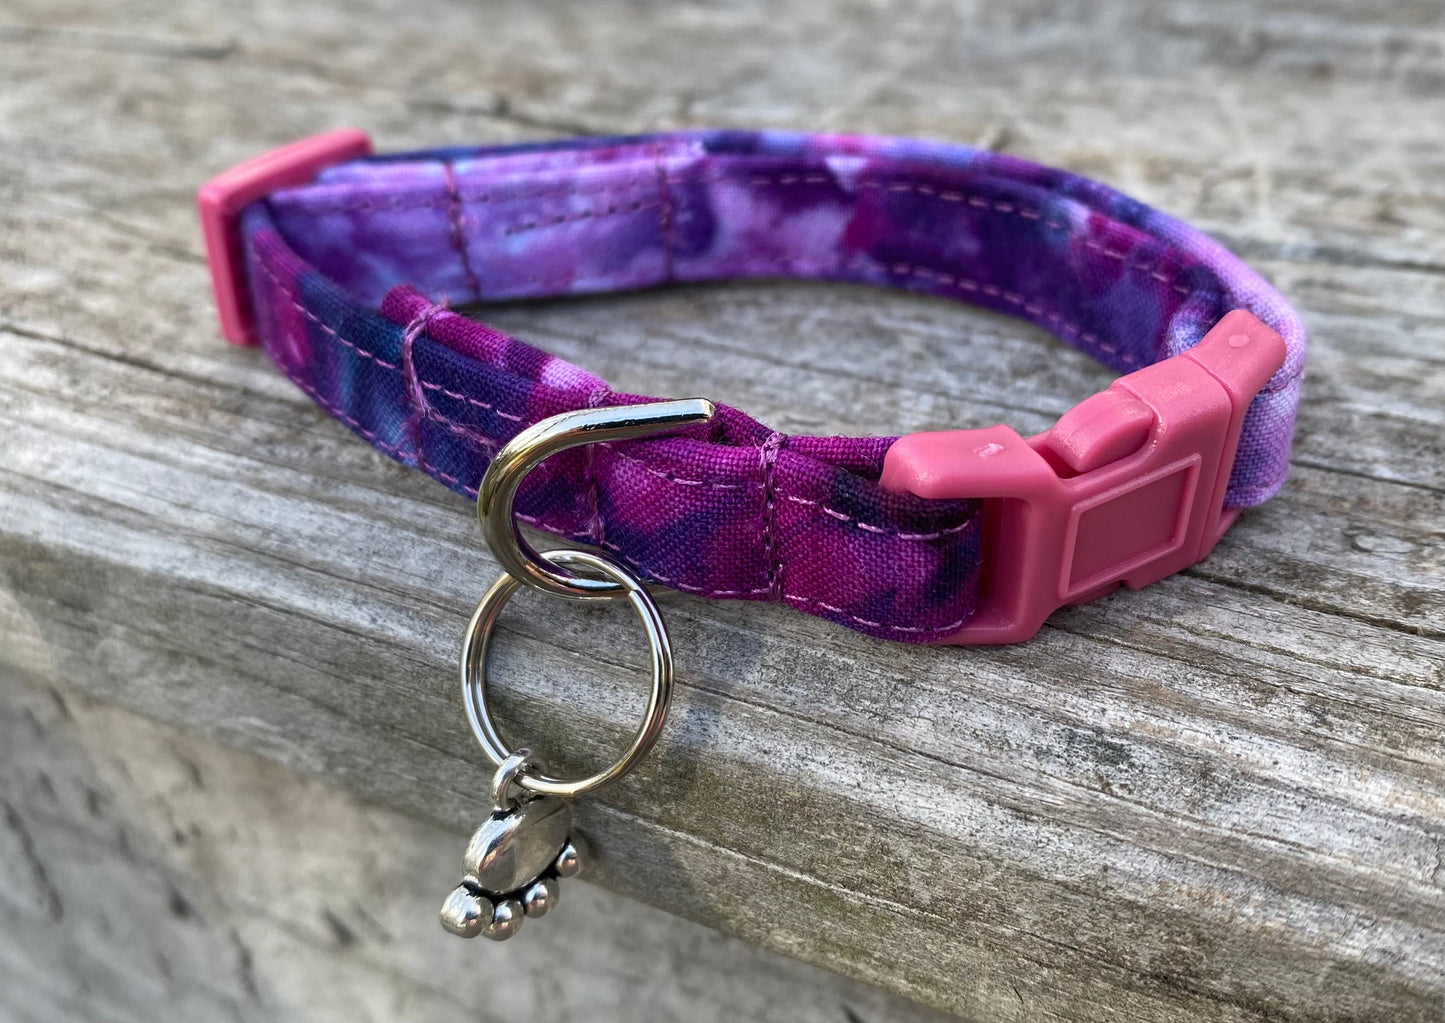 XS dog collar handmade and dyed purple blue pink